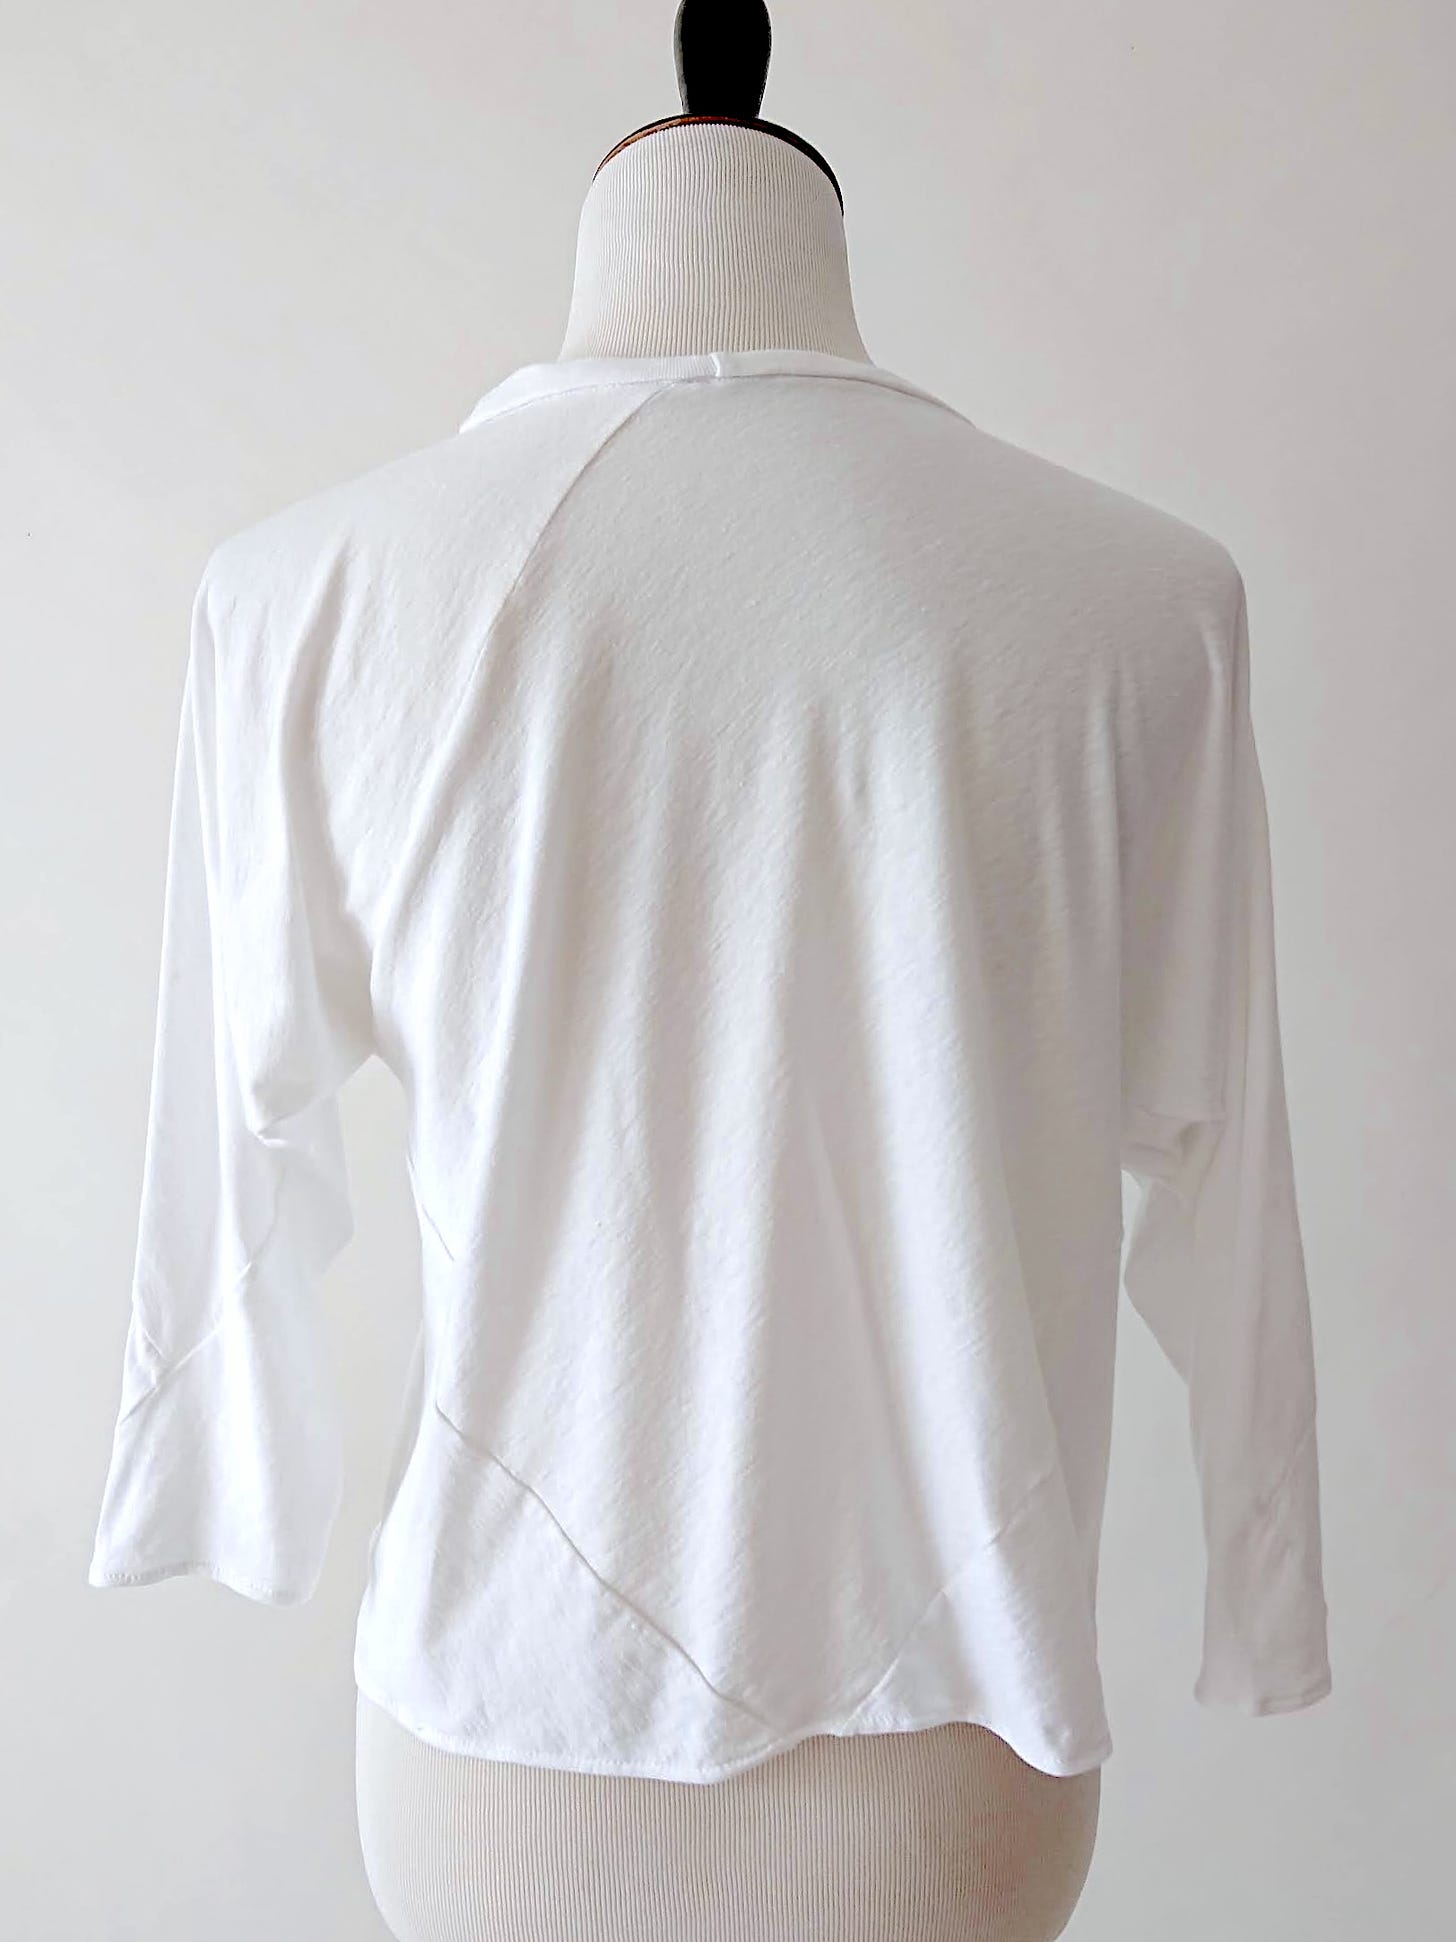 Back view of the 6-Square Top in white C4 cotton jersey